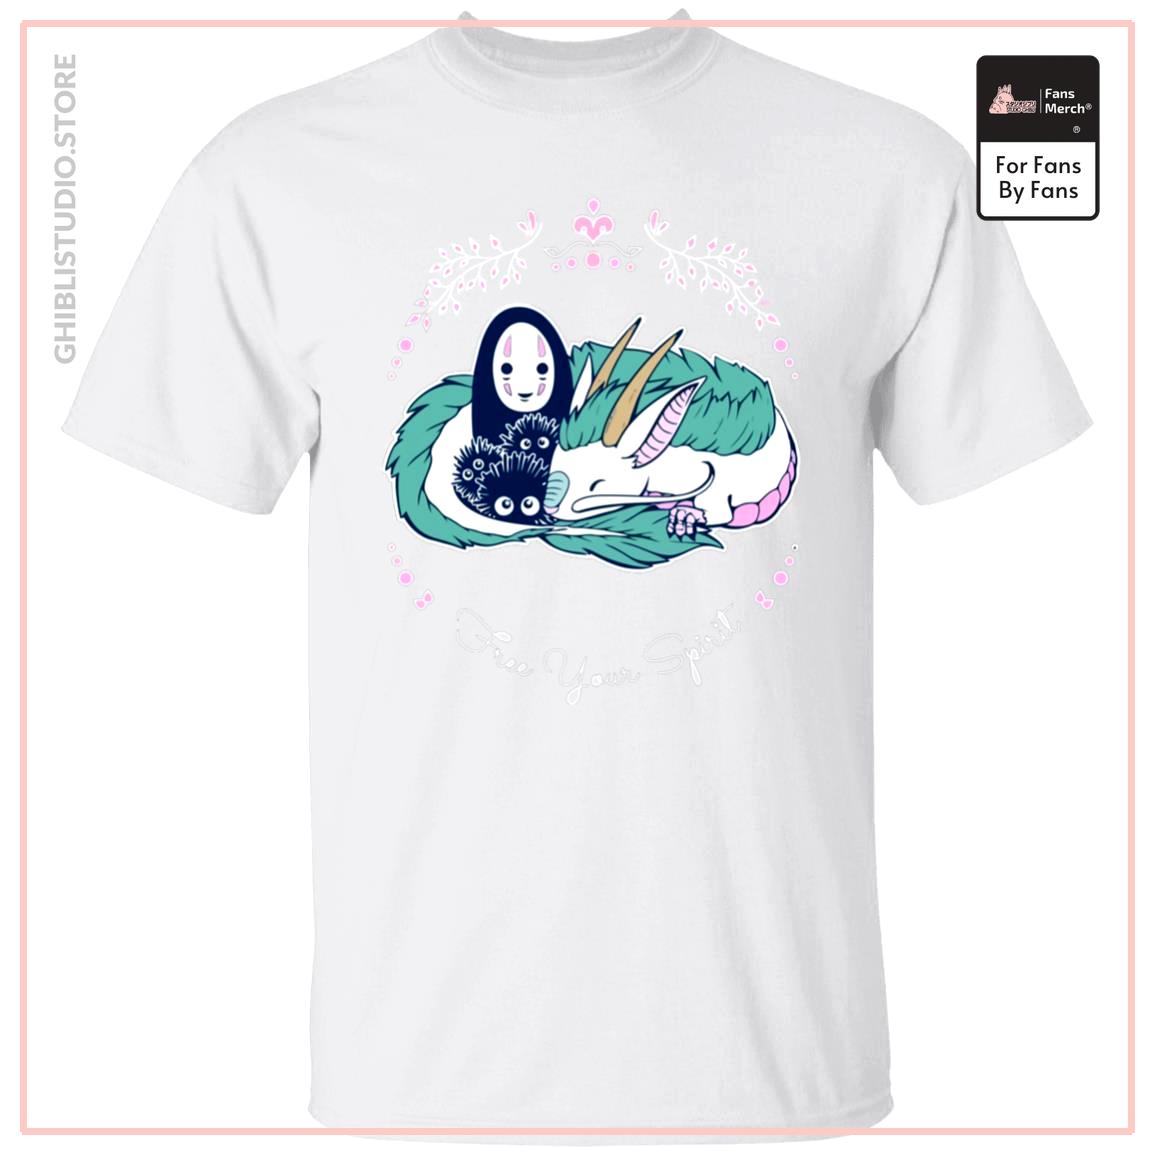 Spirited Away - Sen and Friends by the Bathhouse T Shirt